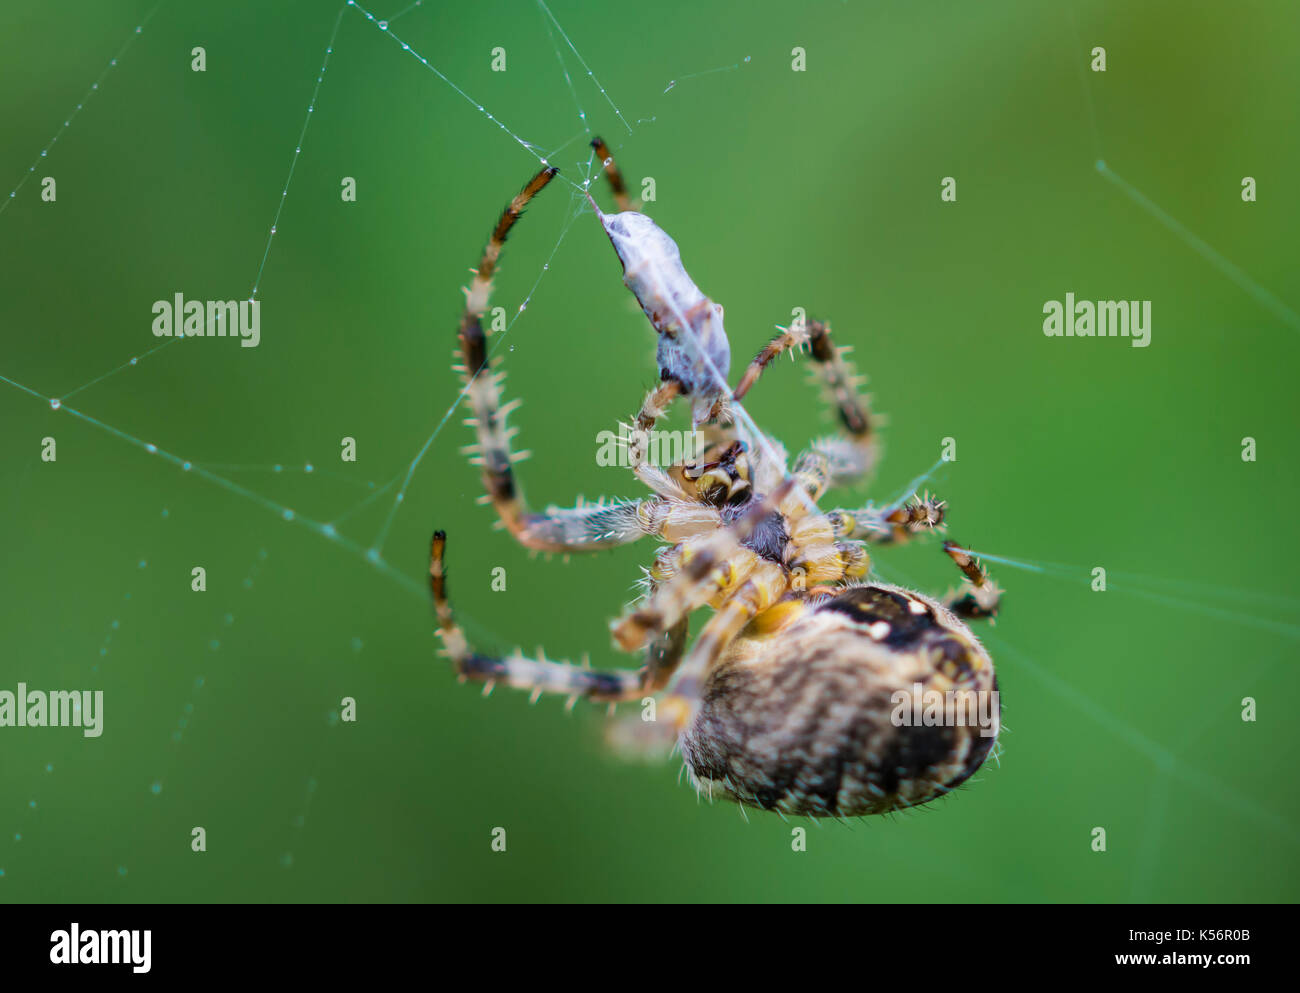 Araneus Diadematus (European Garden Spider, Diadem Spider, Cross Spider), an Orb Weaver spider eating prey in a cocoon on a spiders web in the UK. Stock Photo